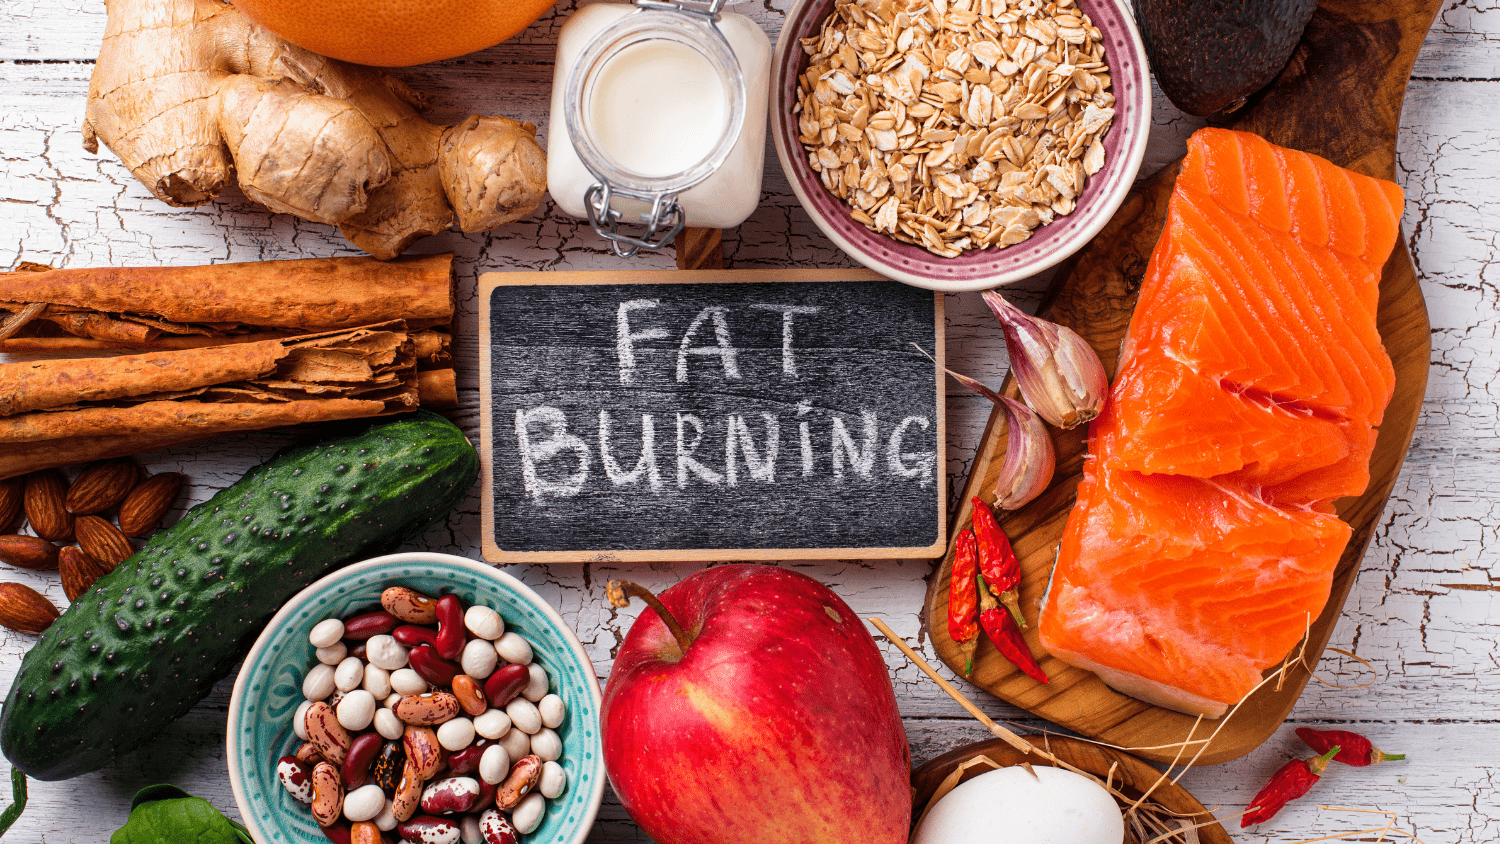 Add These Fat Burning Foods To Your Diet